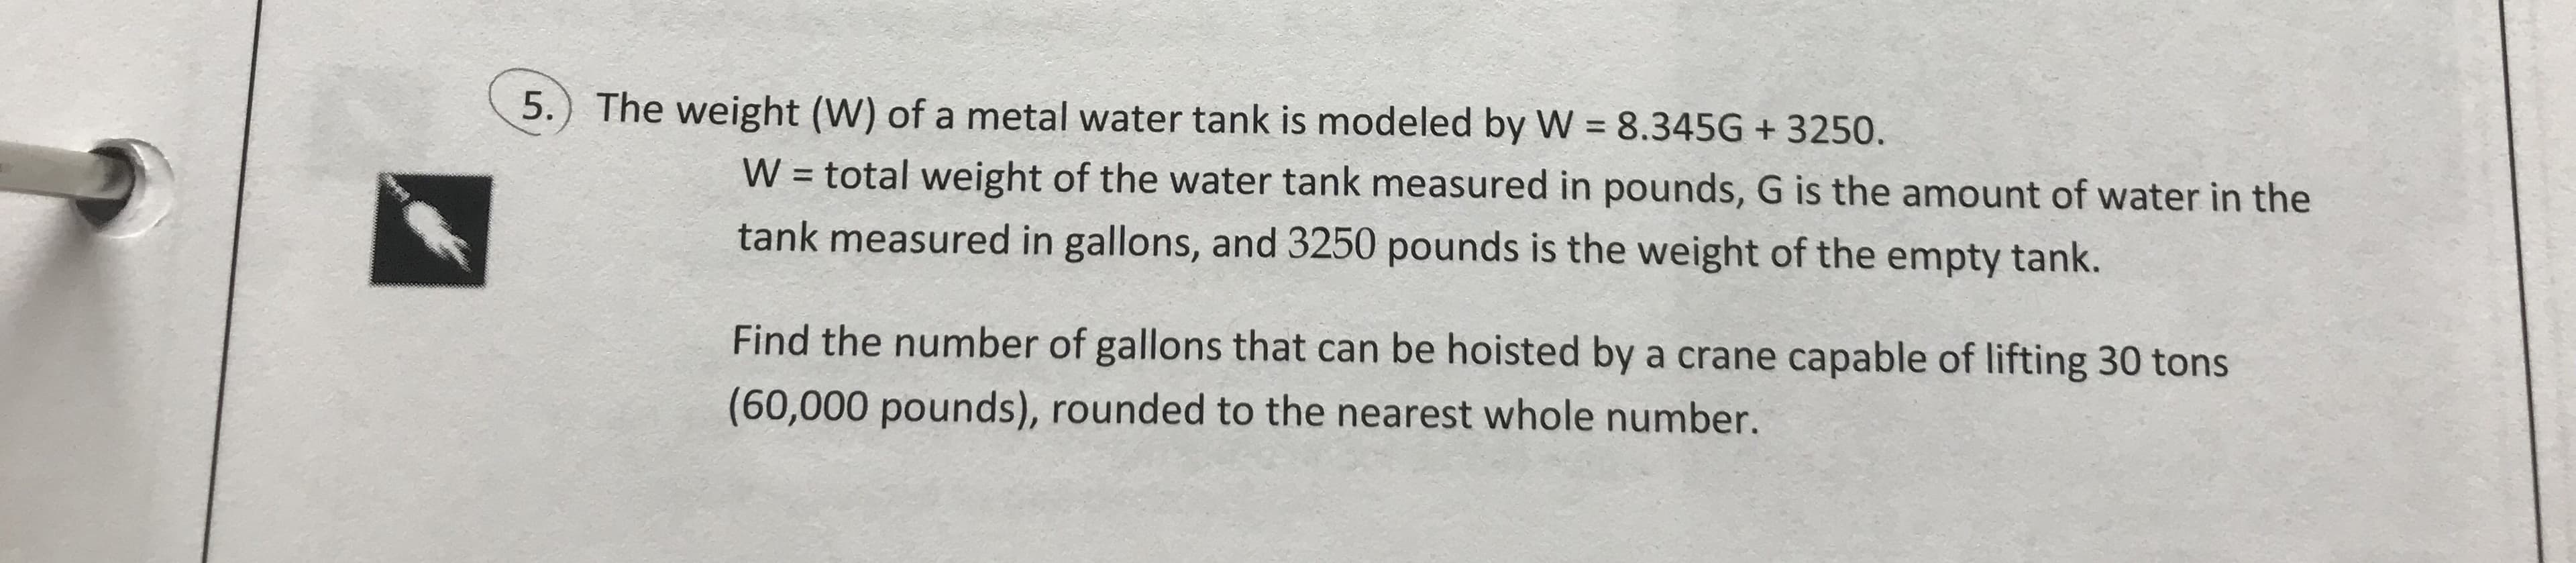 5.) The weight (W) of a metal water tank is modeled by W 8.345G+3250.
W = total weight of the water tank measured in pounds, G is the amount of water in the
tank measured in gallons, and 3250 pounds is the weight of the empty tank.
Find the number of gallons that can be hoisted by a crane capable of lifting 30 tons
(60,000 pounds), rounded to the nearest whole number.
